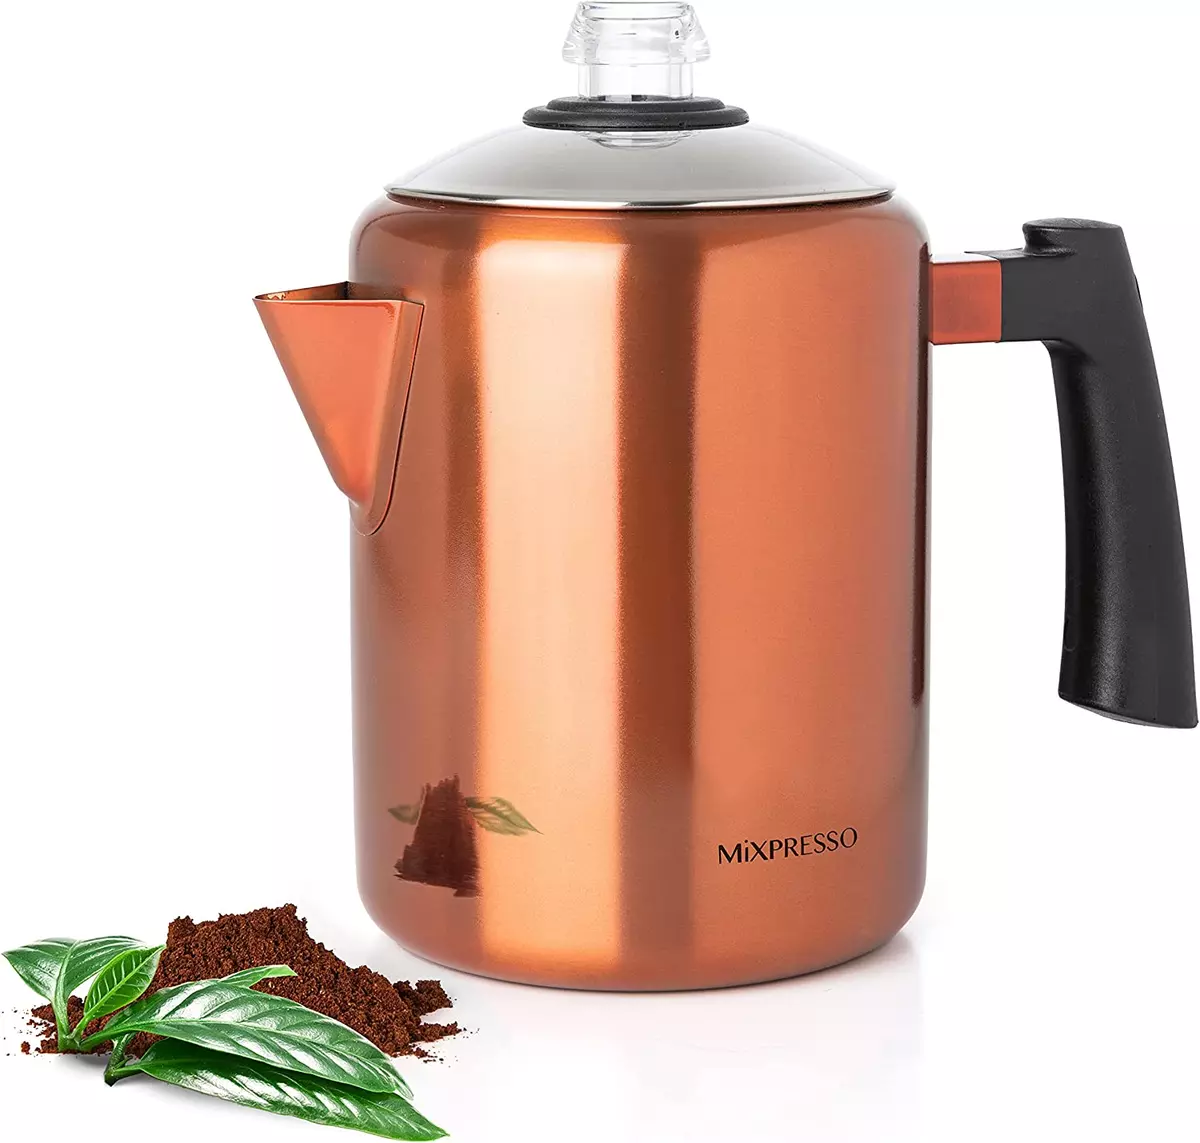 Coffee Percolator,Camping Coffee Pot 9 Cups Stainless Steel Coffee Maker  with Clear Glass Knob, Percolator Coffee Pot for Campfire or Stovetop  Coffee